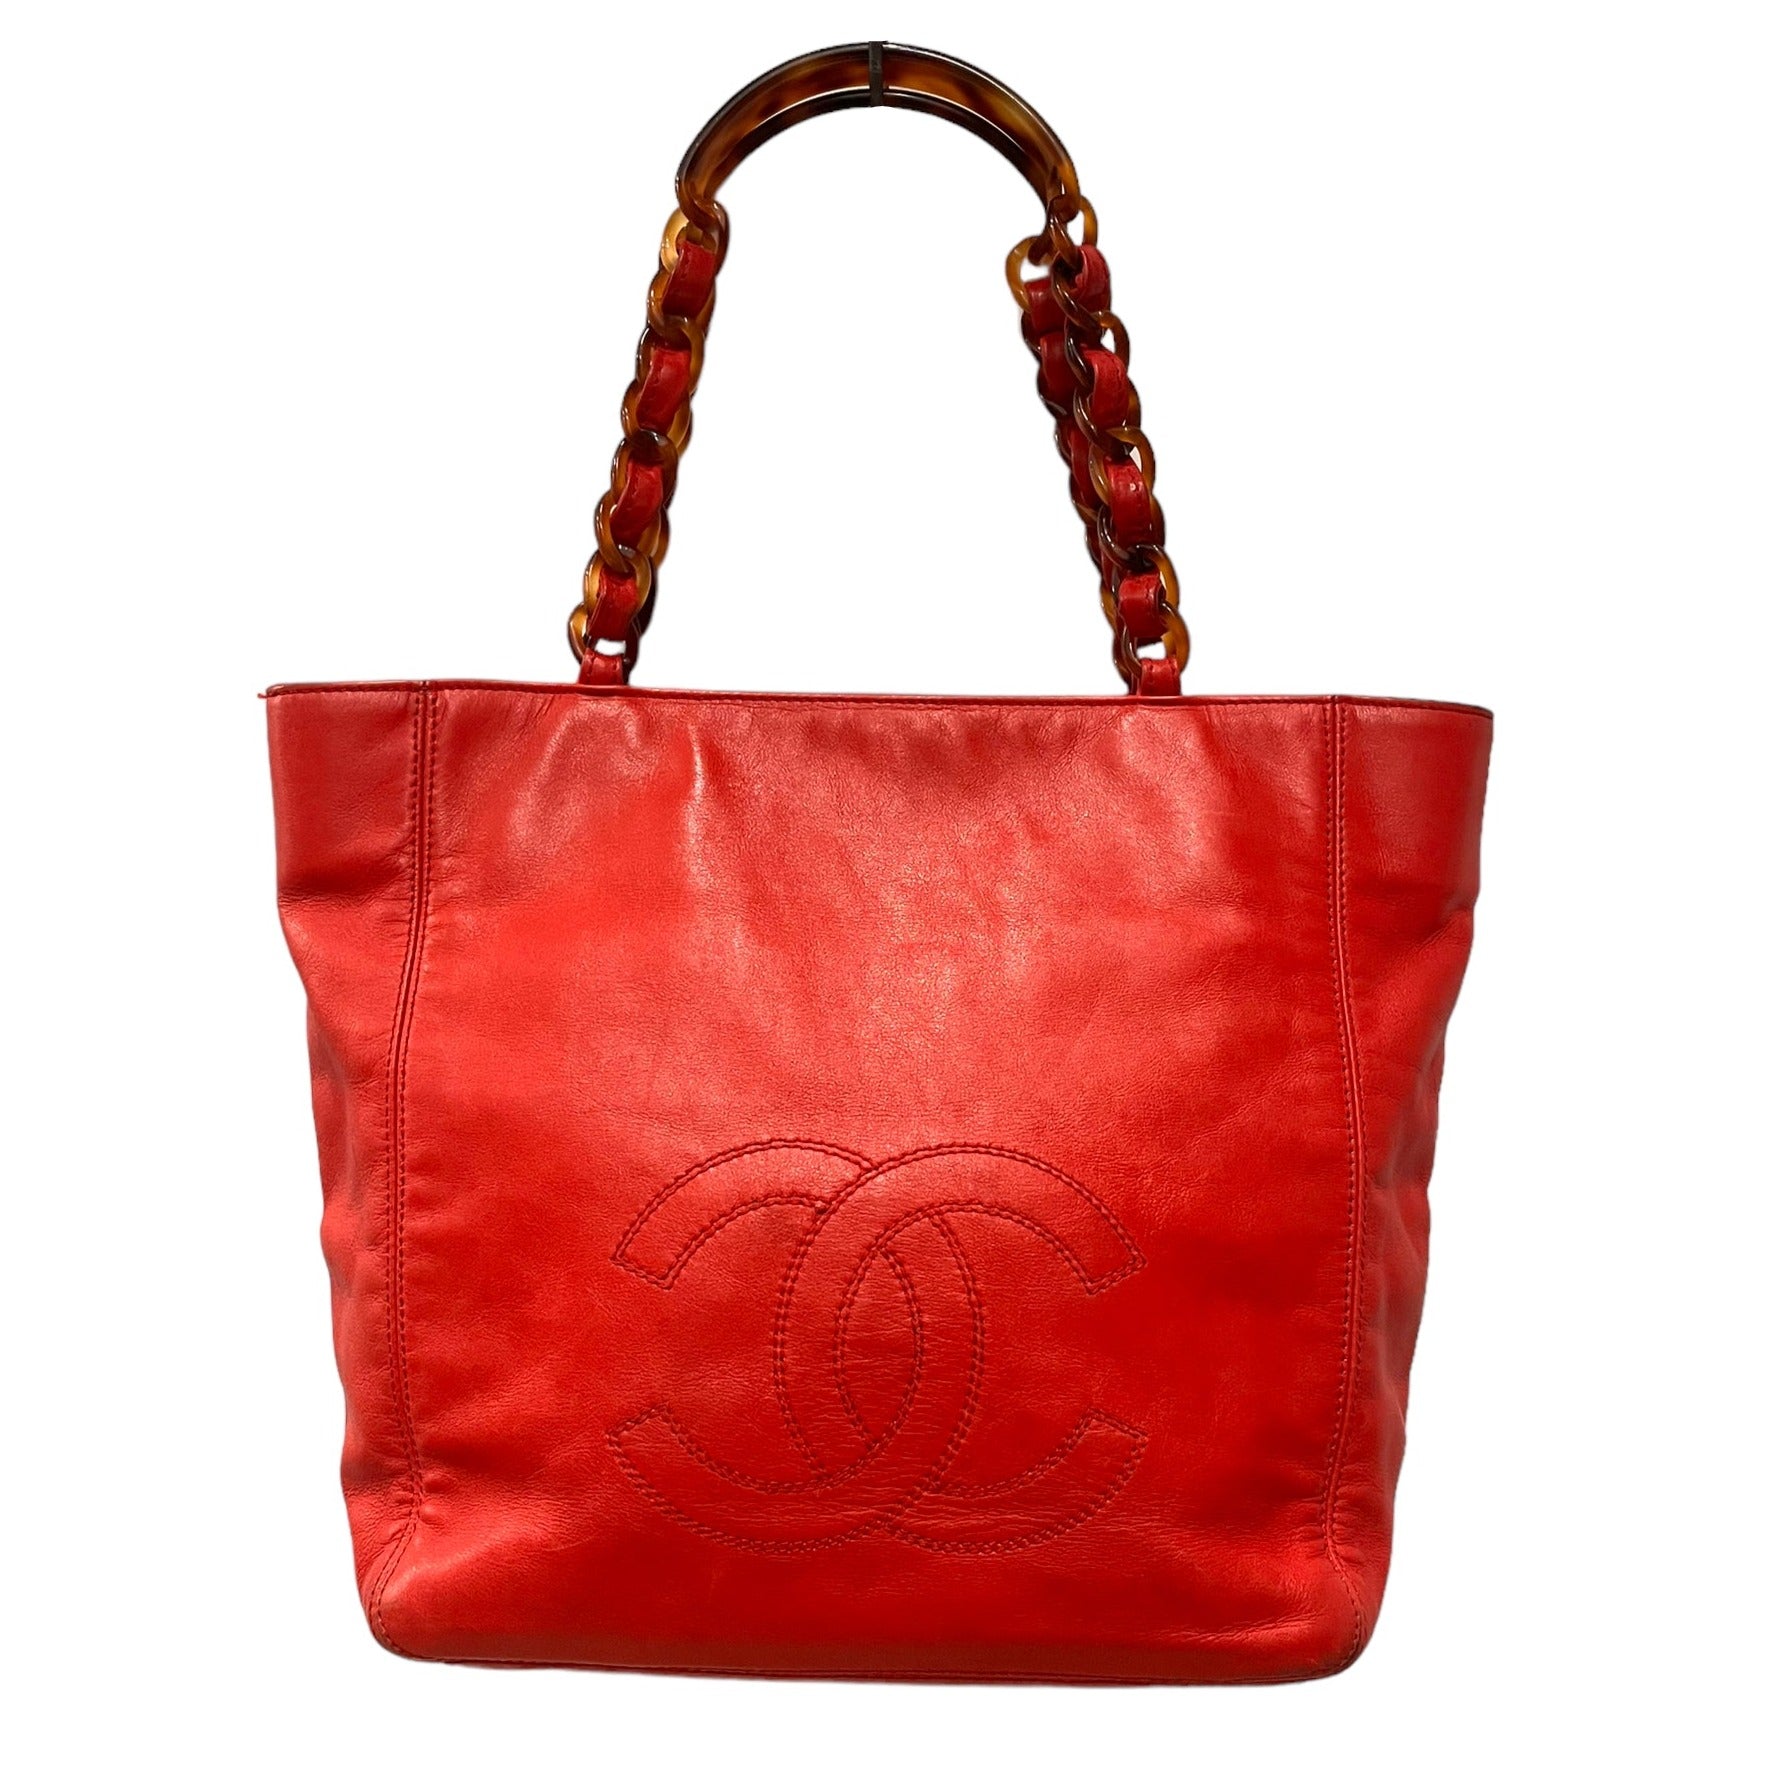 Chanel Vintage Chanel Red Quilted Leather Hand Bag